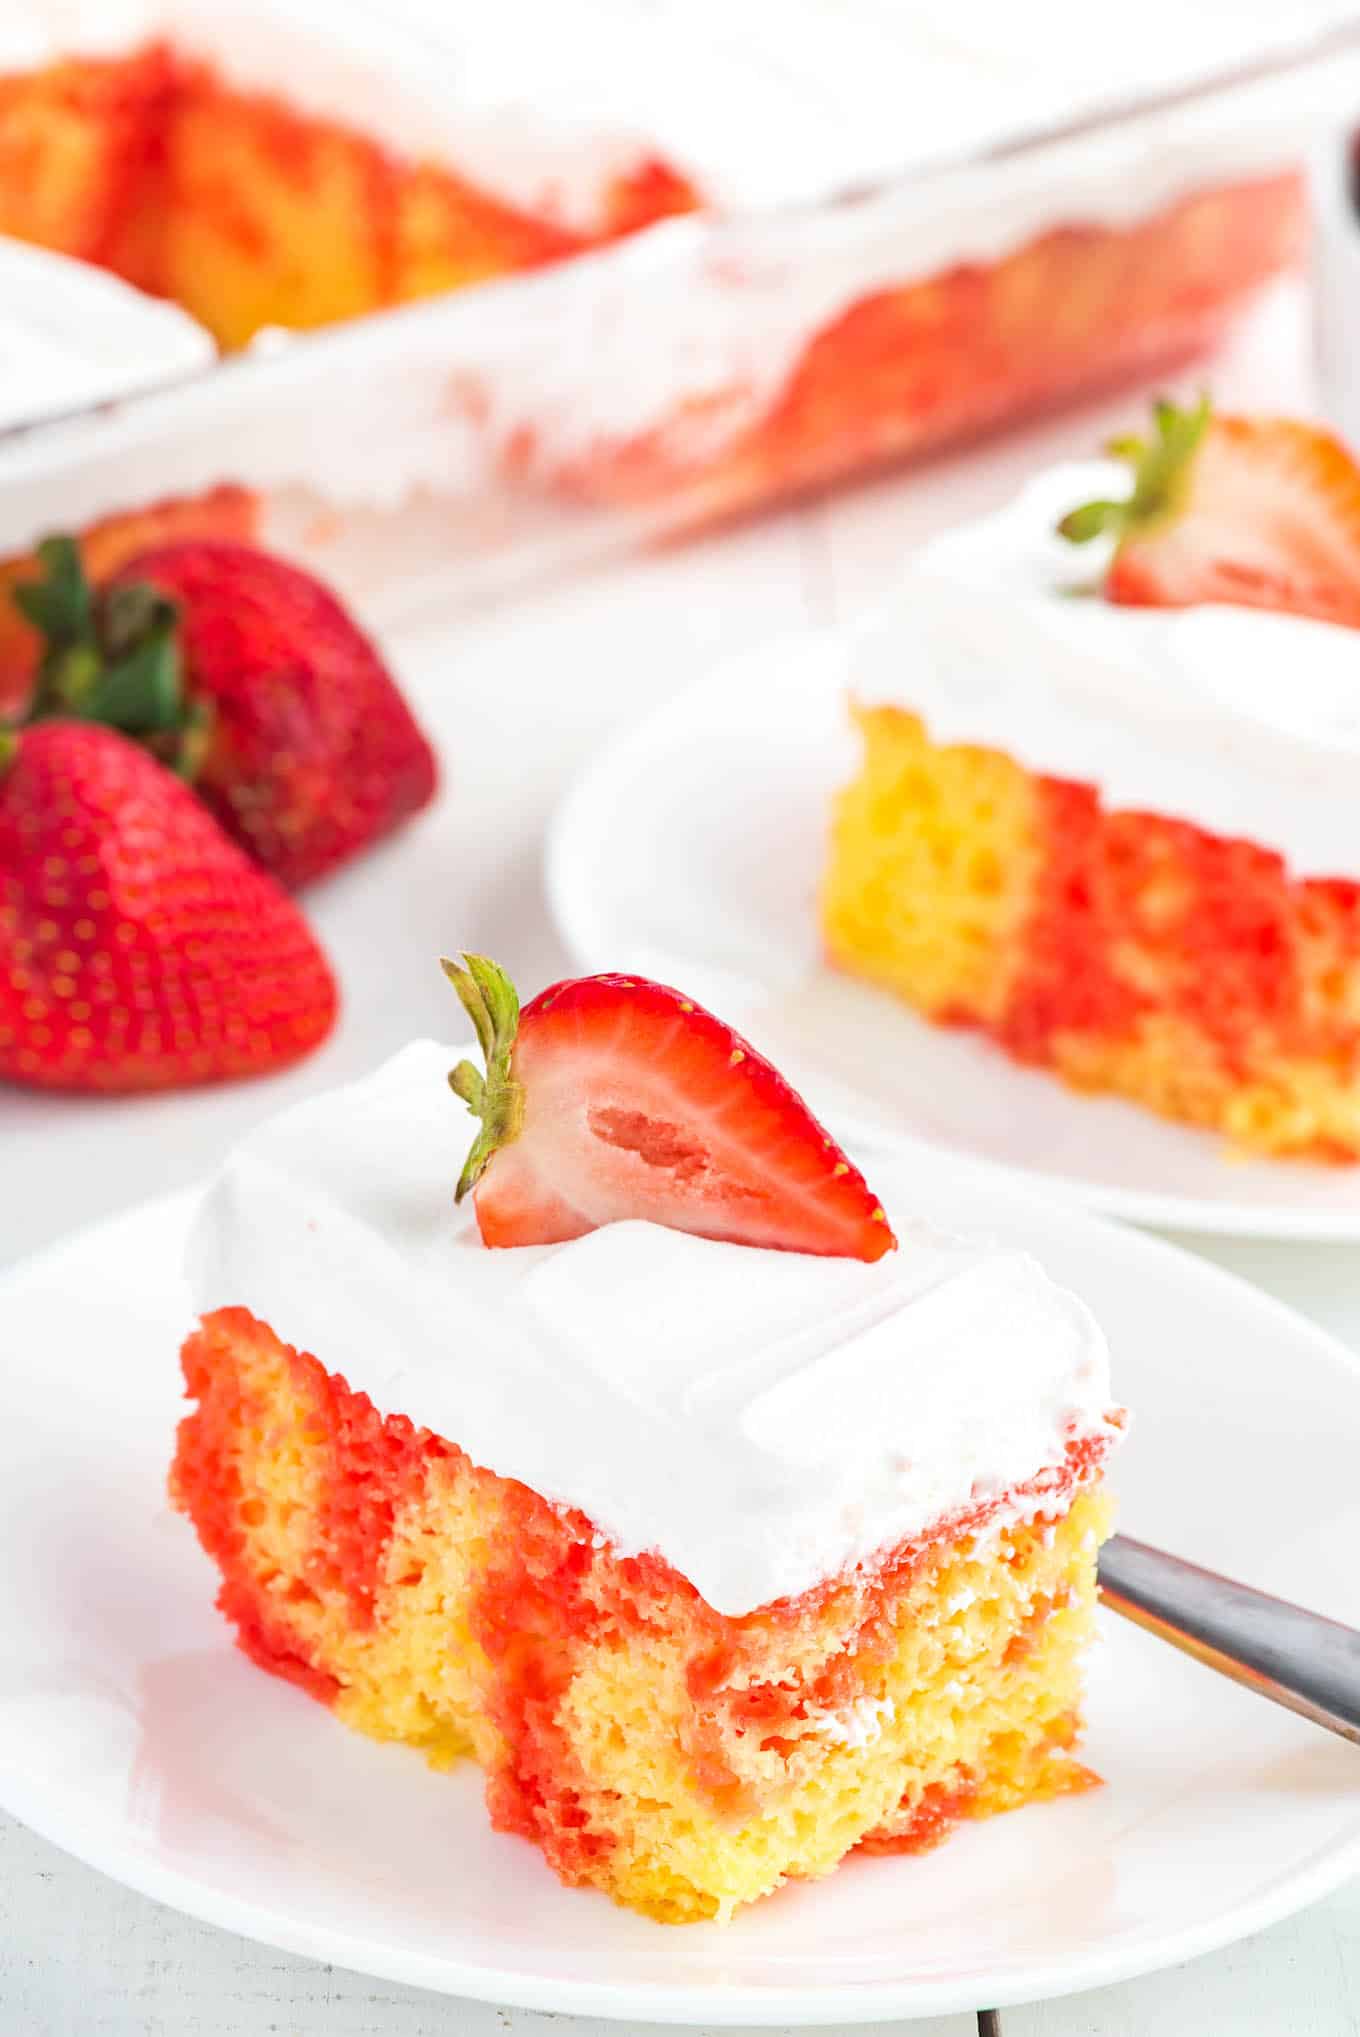 A square of jello poke cake topped with a strawberry half on a plate.